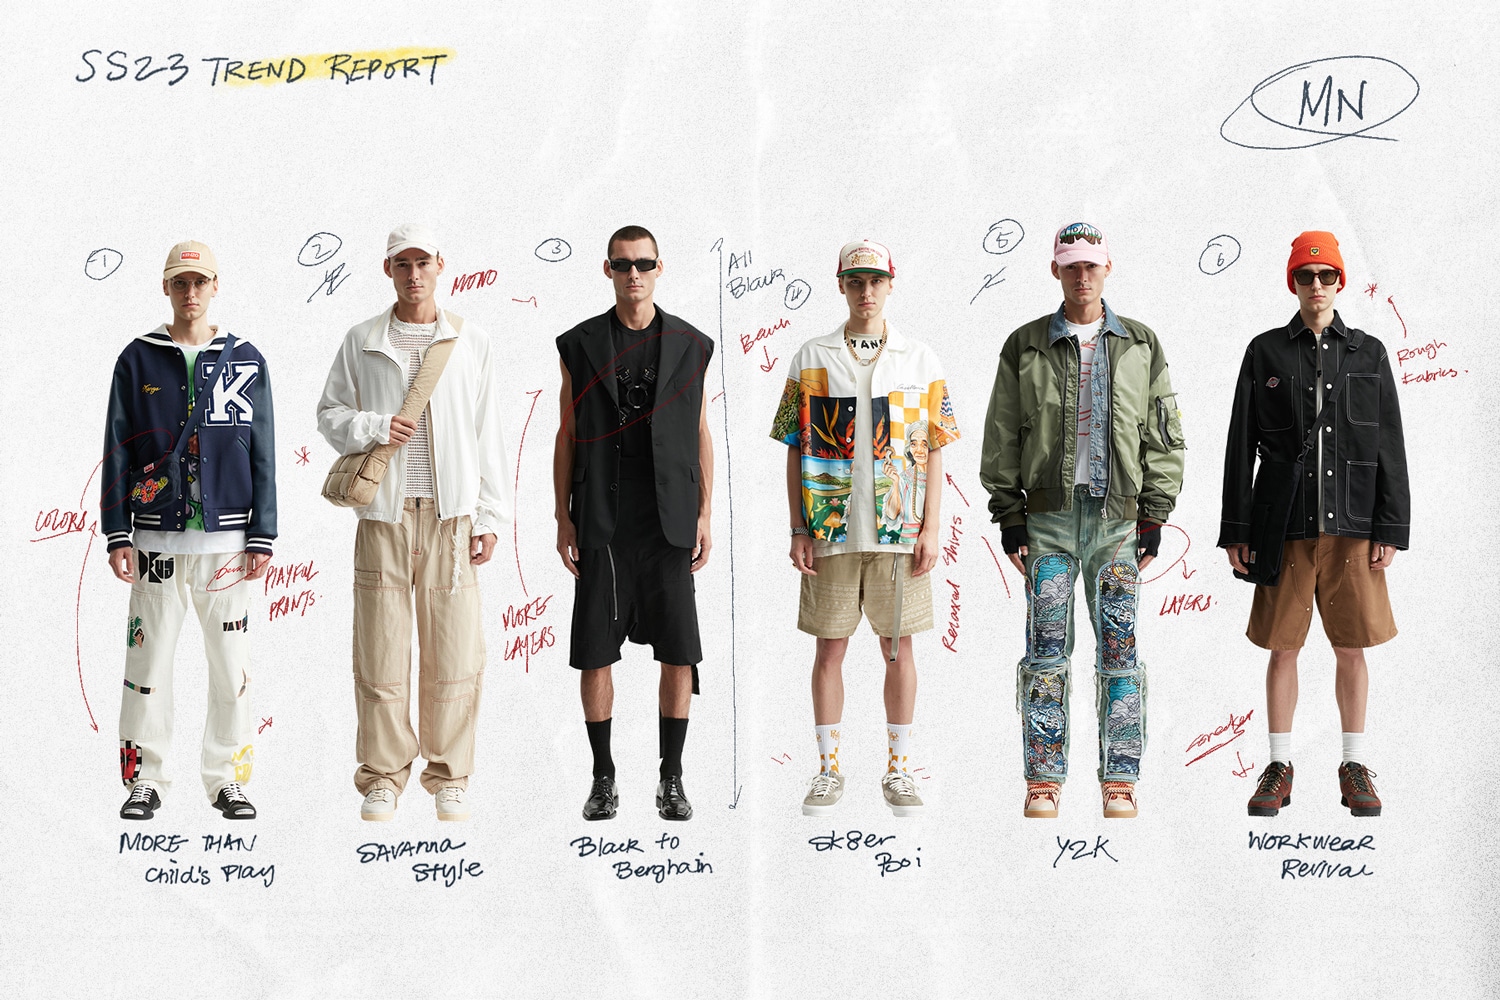 SS23 Trend Report